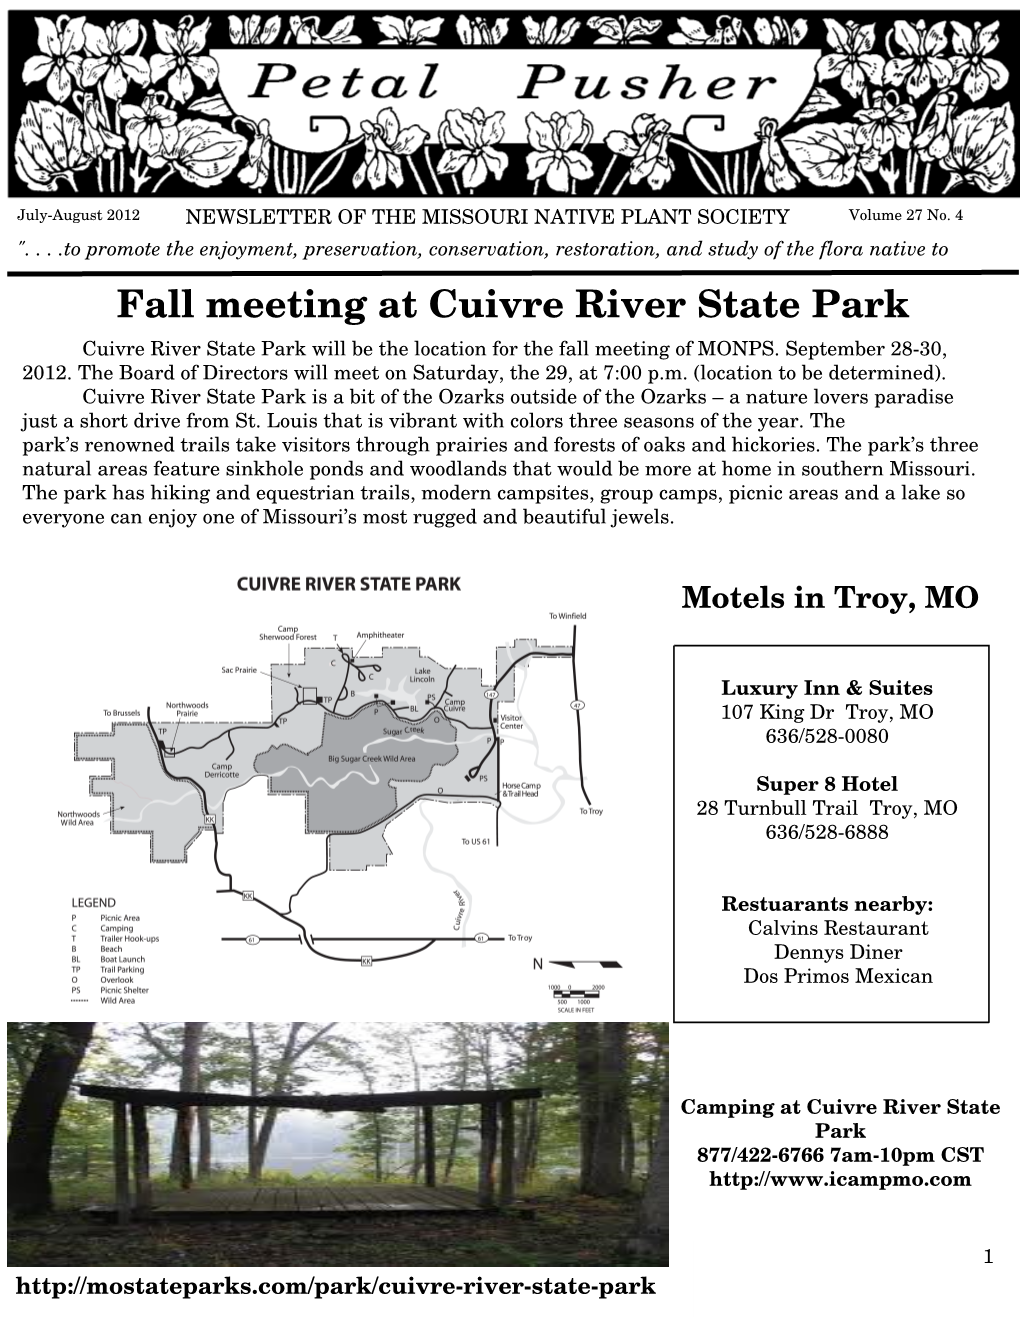 Fall Meeting at Cuivre River State Park Cuivre River State Park Will Be the Location for the Fall Meeting of MONPS